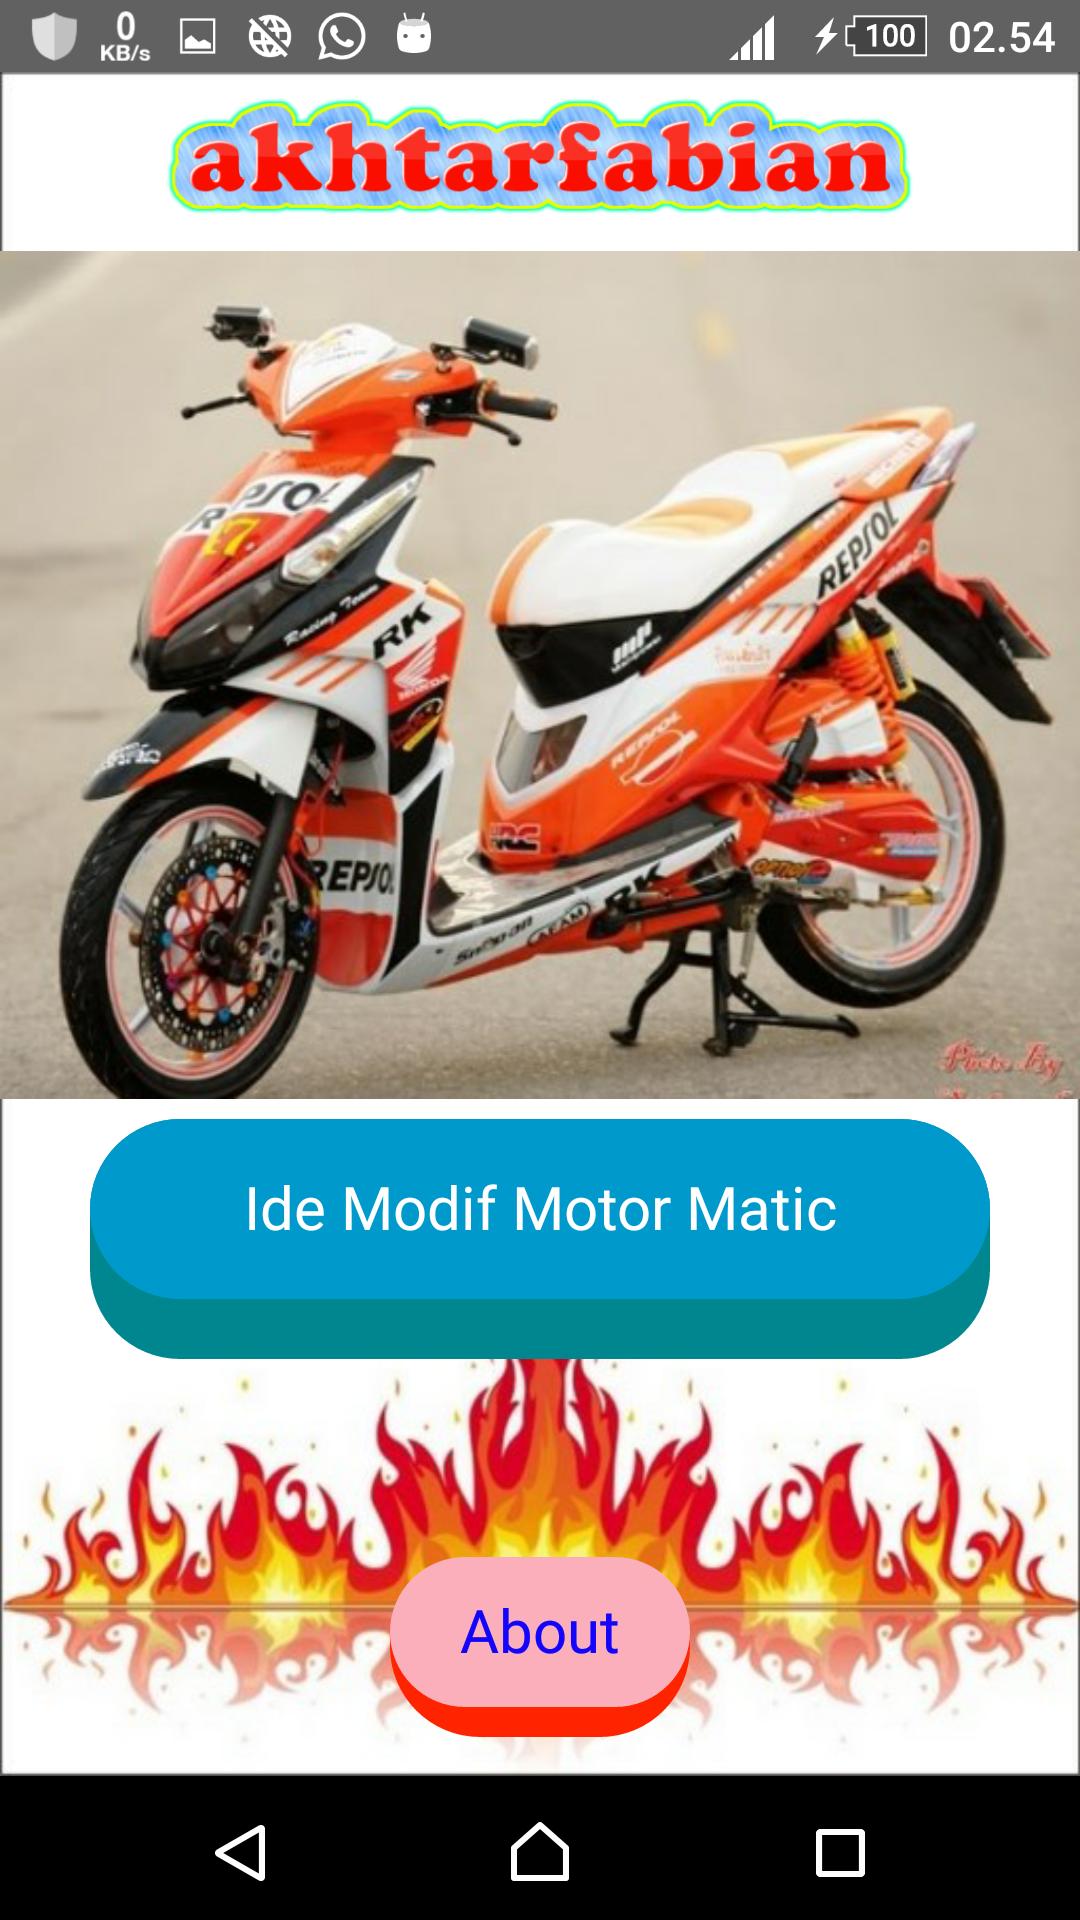 Ide Modif Motor Matic For Android Apk Download